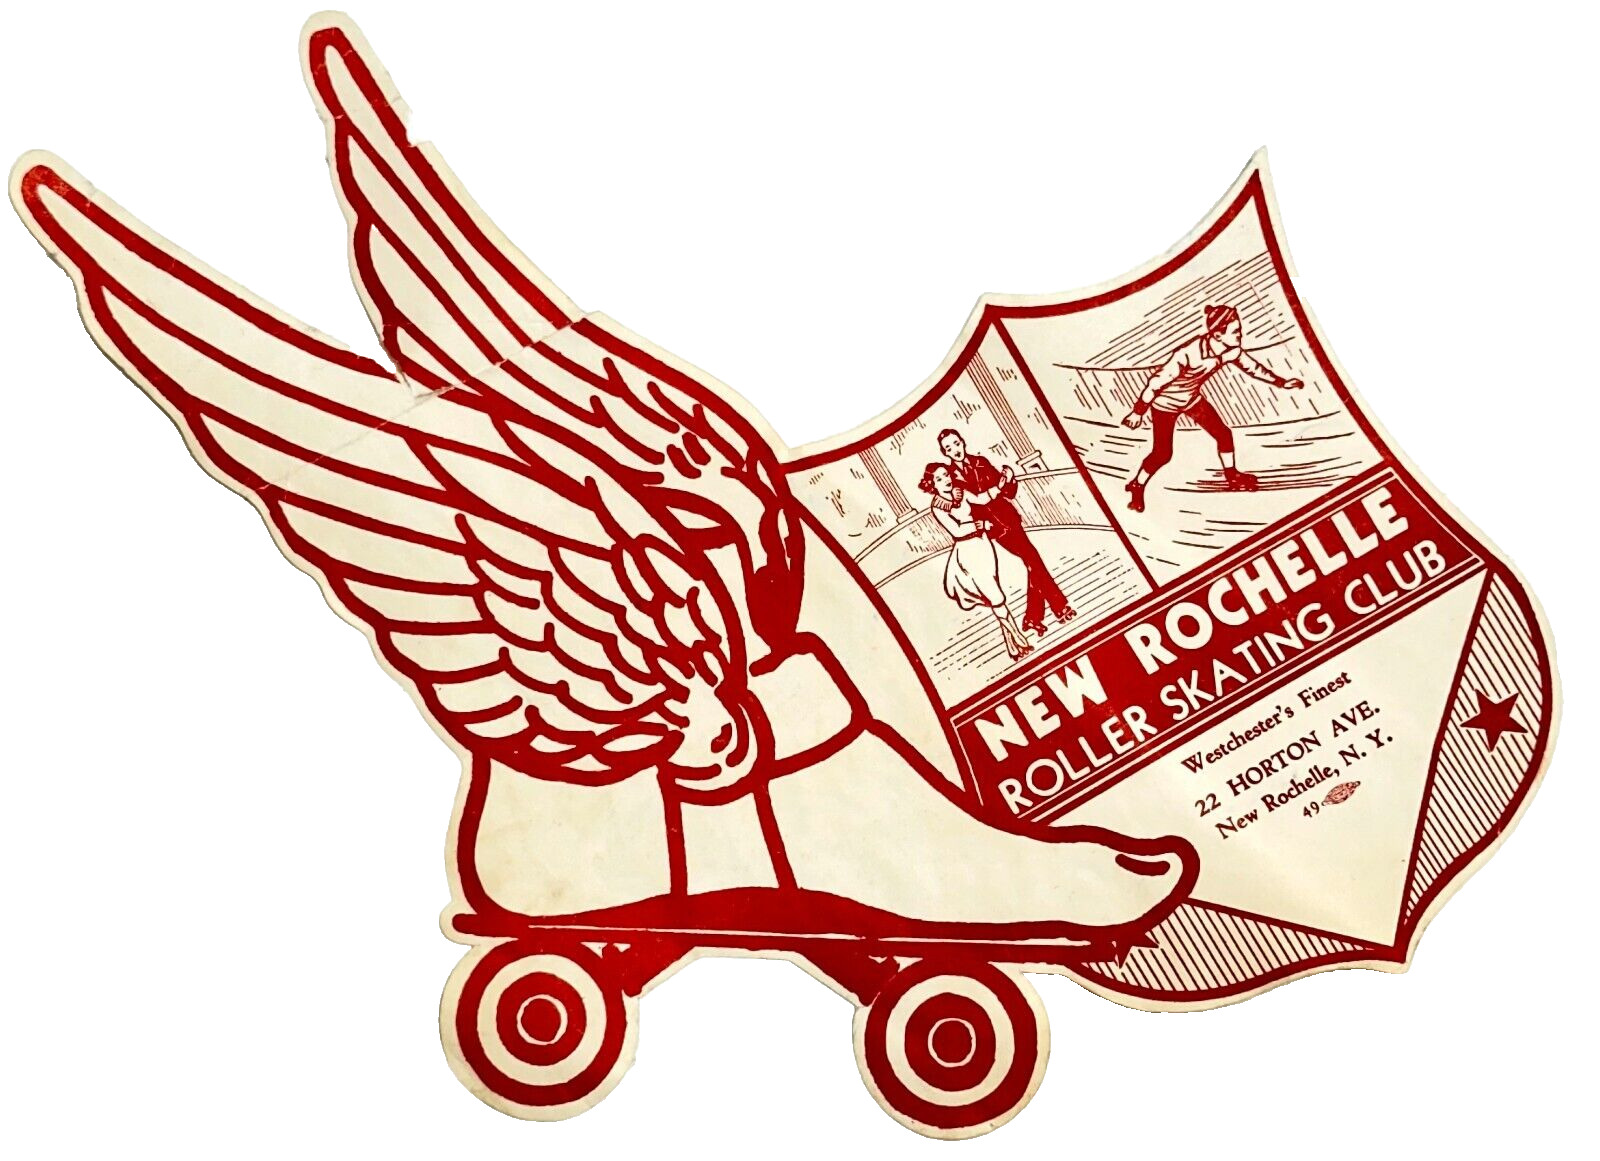 1940s Roller Skating Label New Rochelle Roller Skating Club Westchester\'s Finest